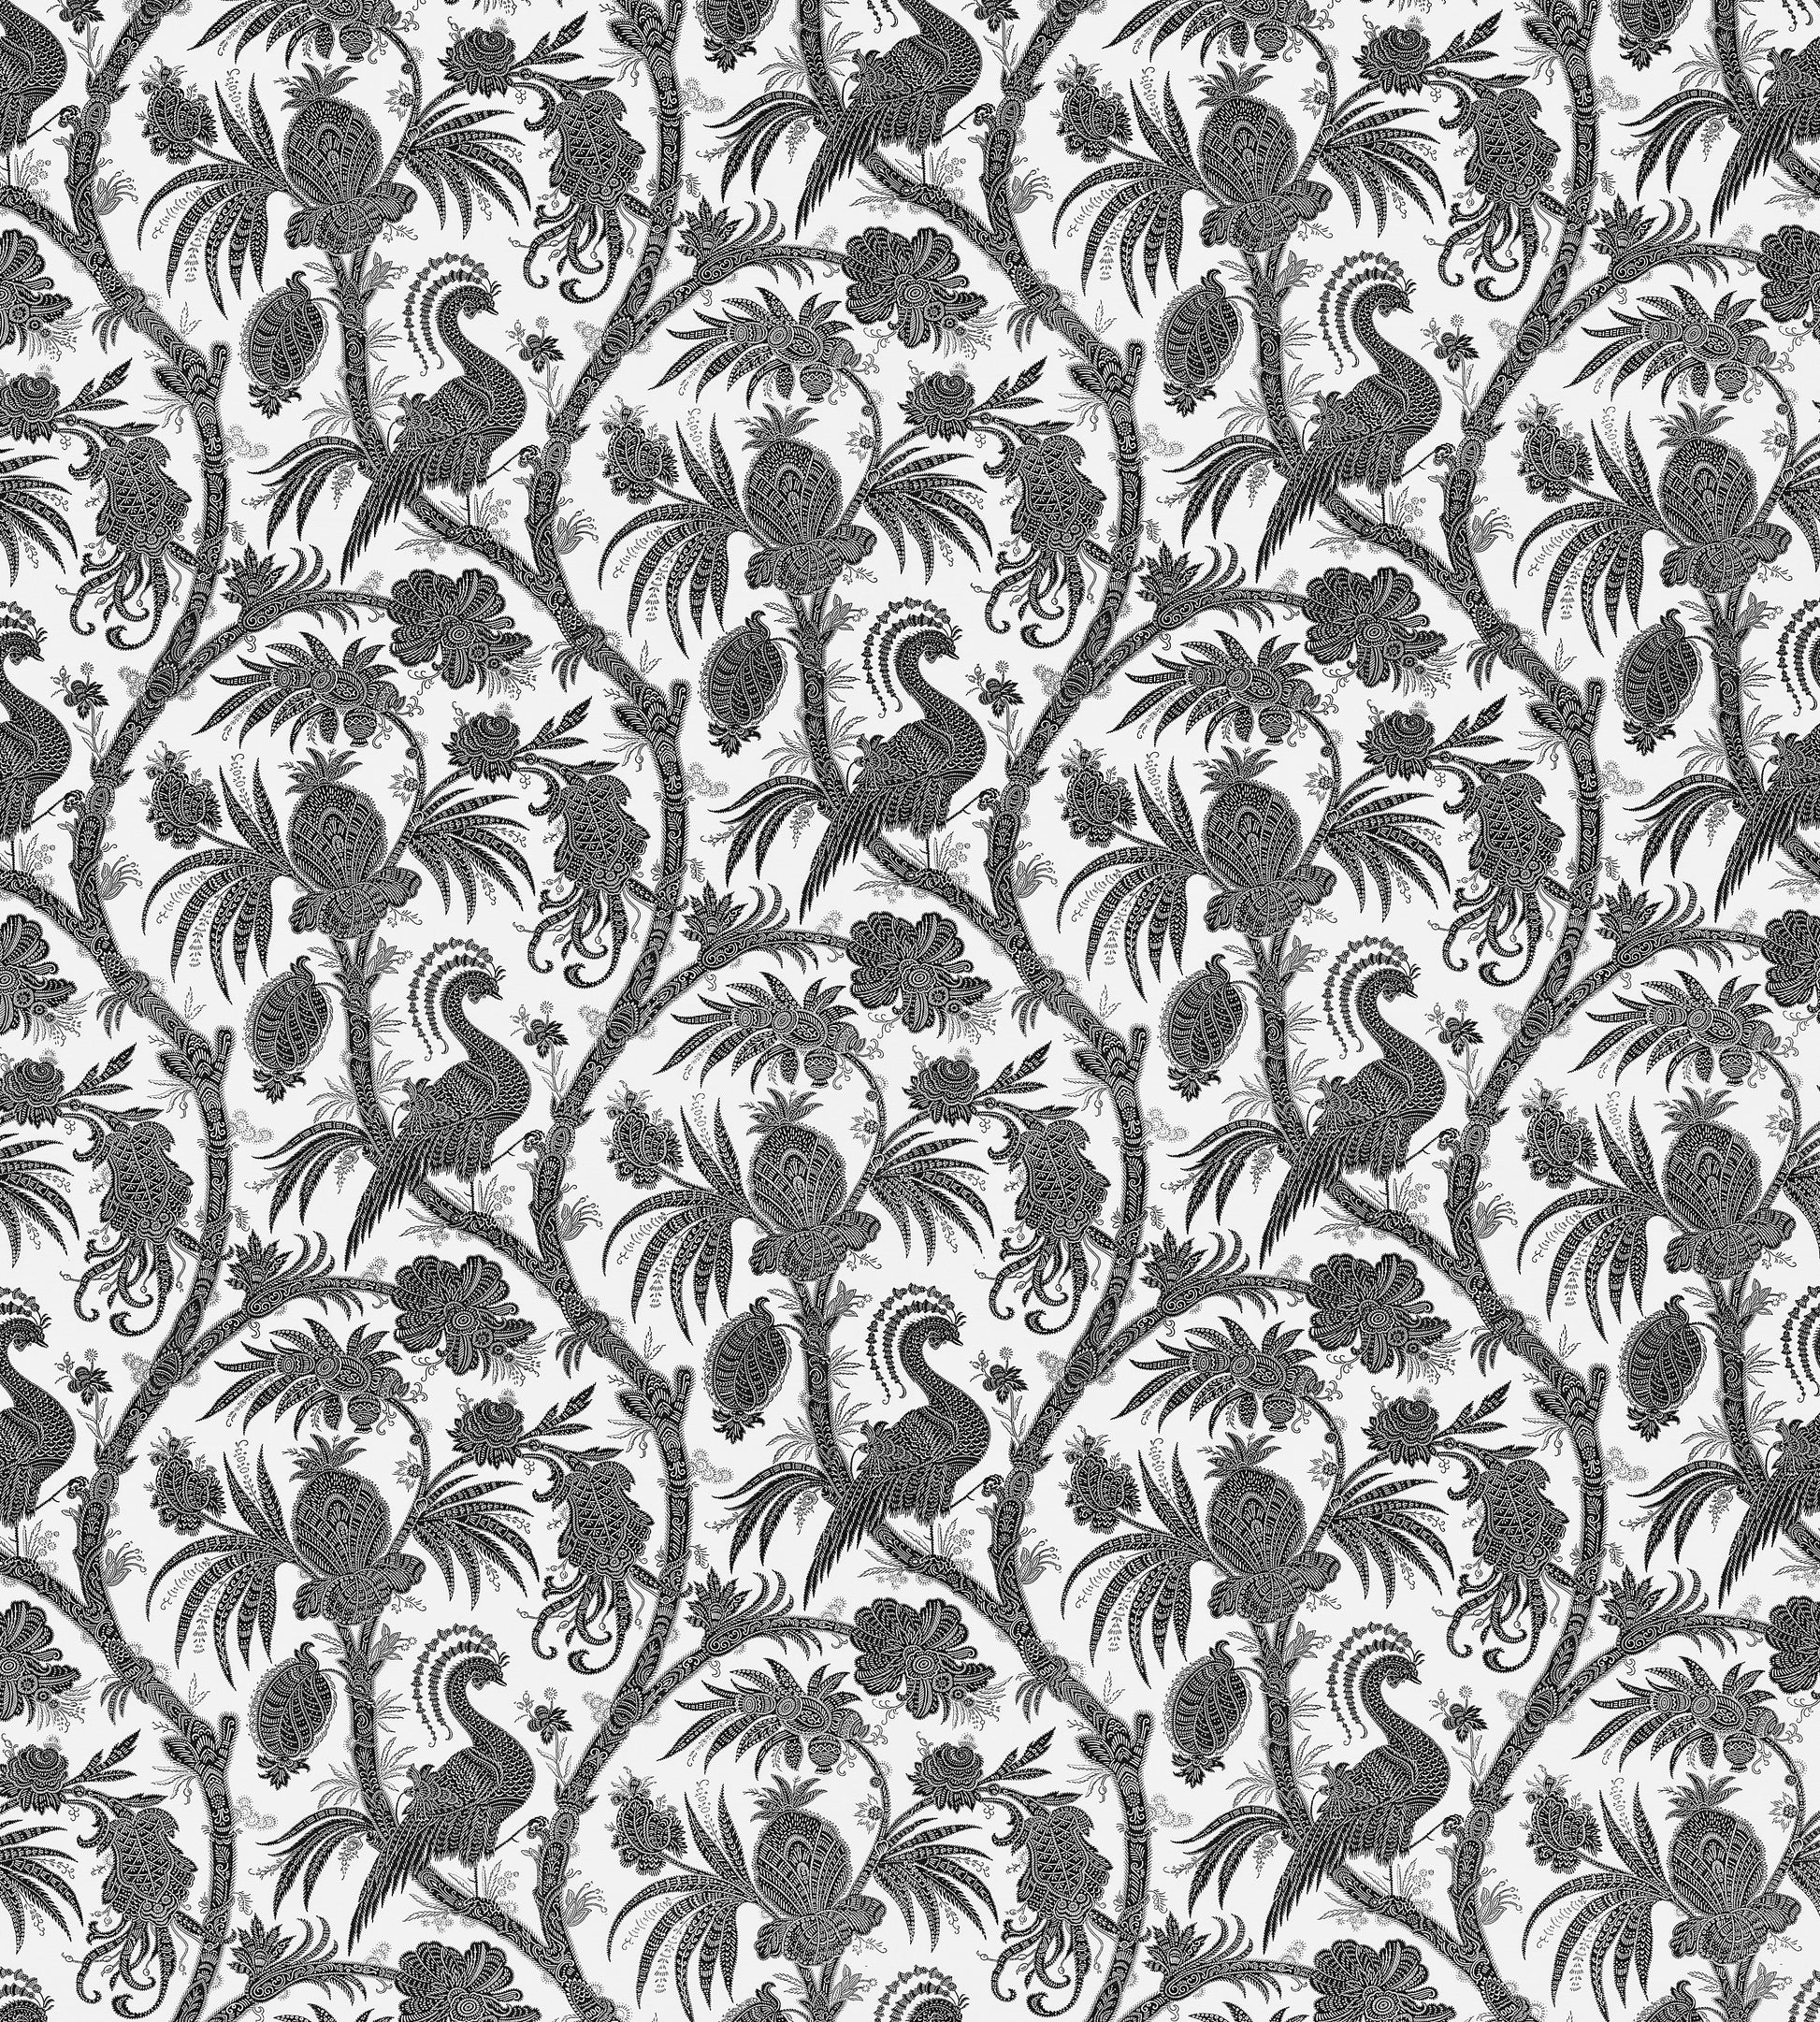 Purchase Scalamandre Fabric Product SC 000116575, Balinese Peacock Linen Print Sky 2